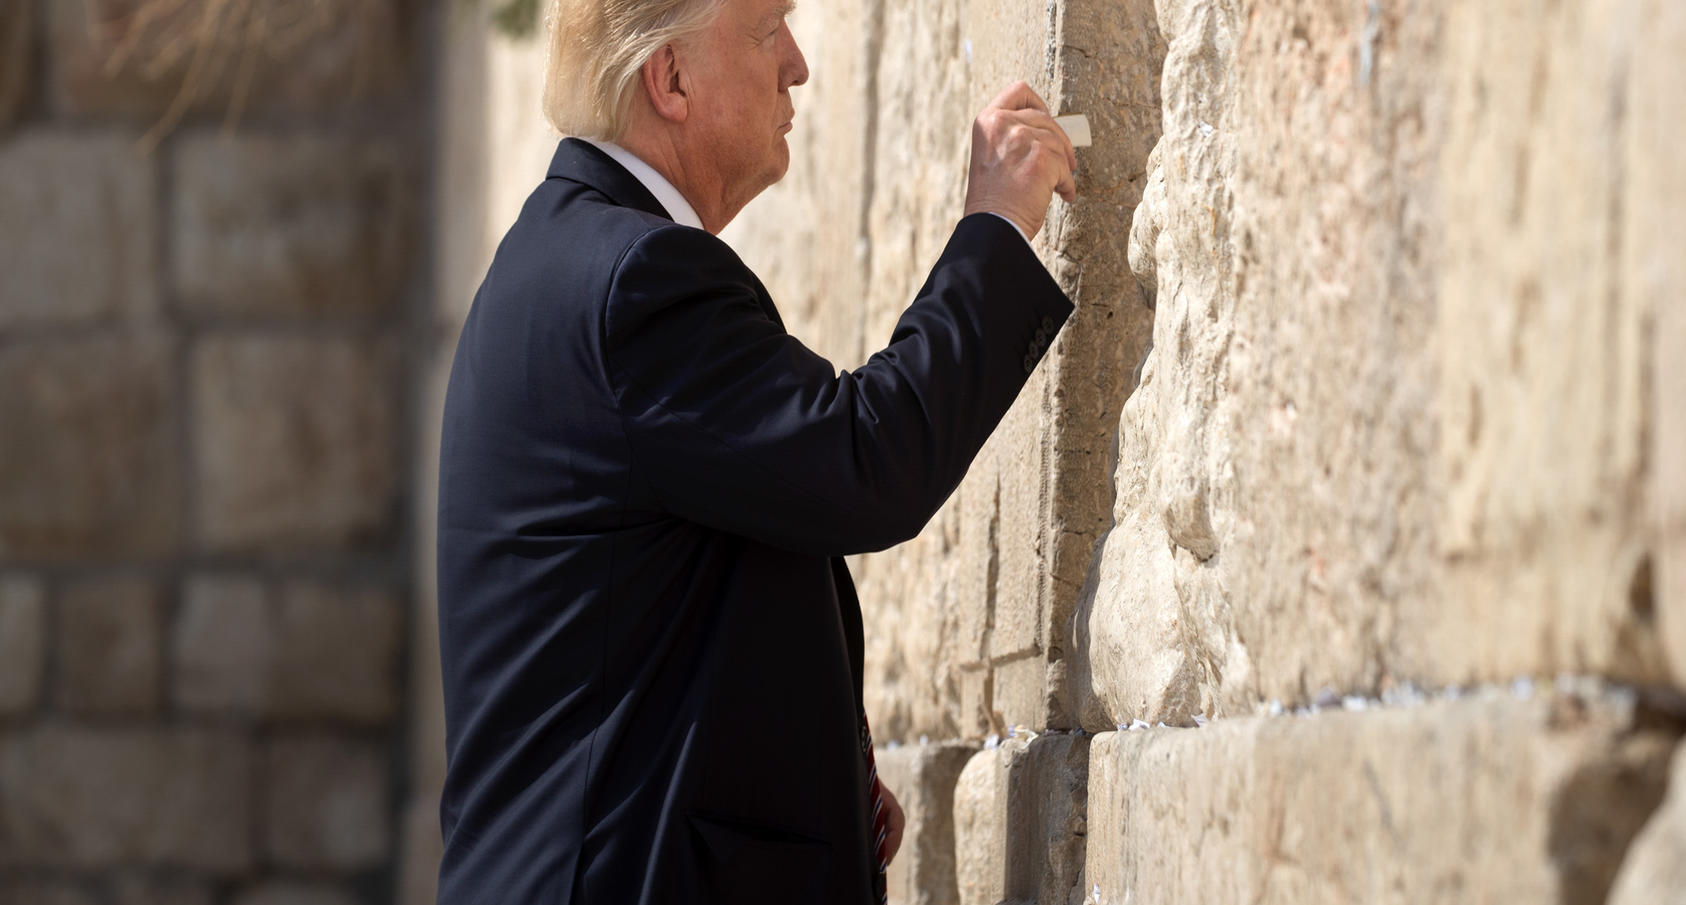 President Donald Trump places a paper into the Western Wall in Jerusalem, May 22, 2017. Photo Courtesy of The New York Times/Stephen Crowley